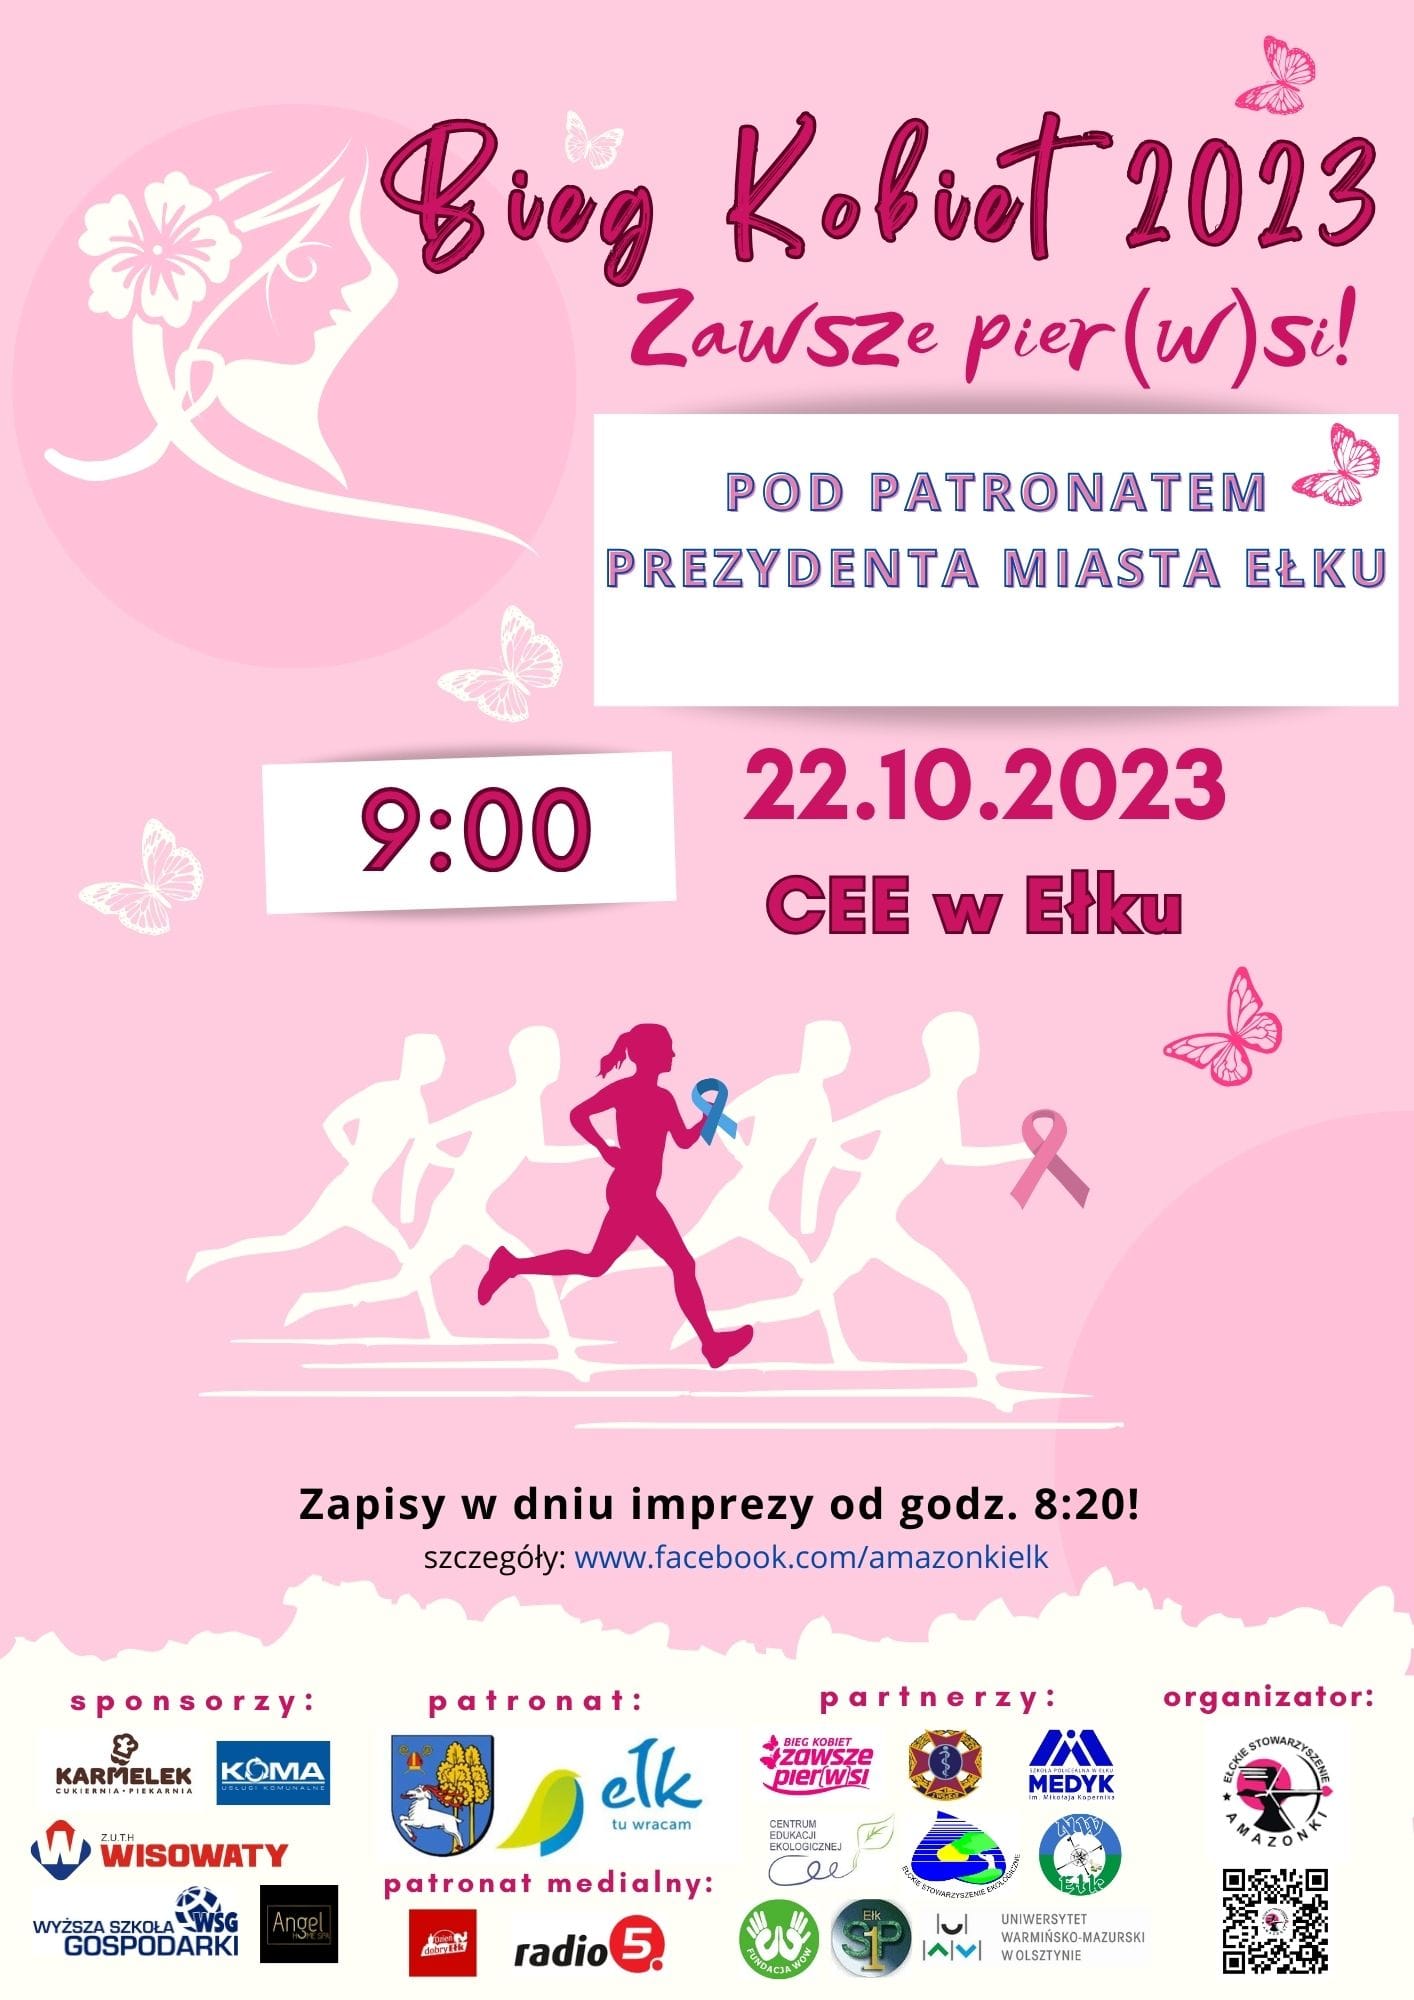 Women's Run 2023 as part of breast cancer prevention!